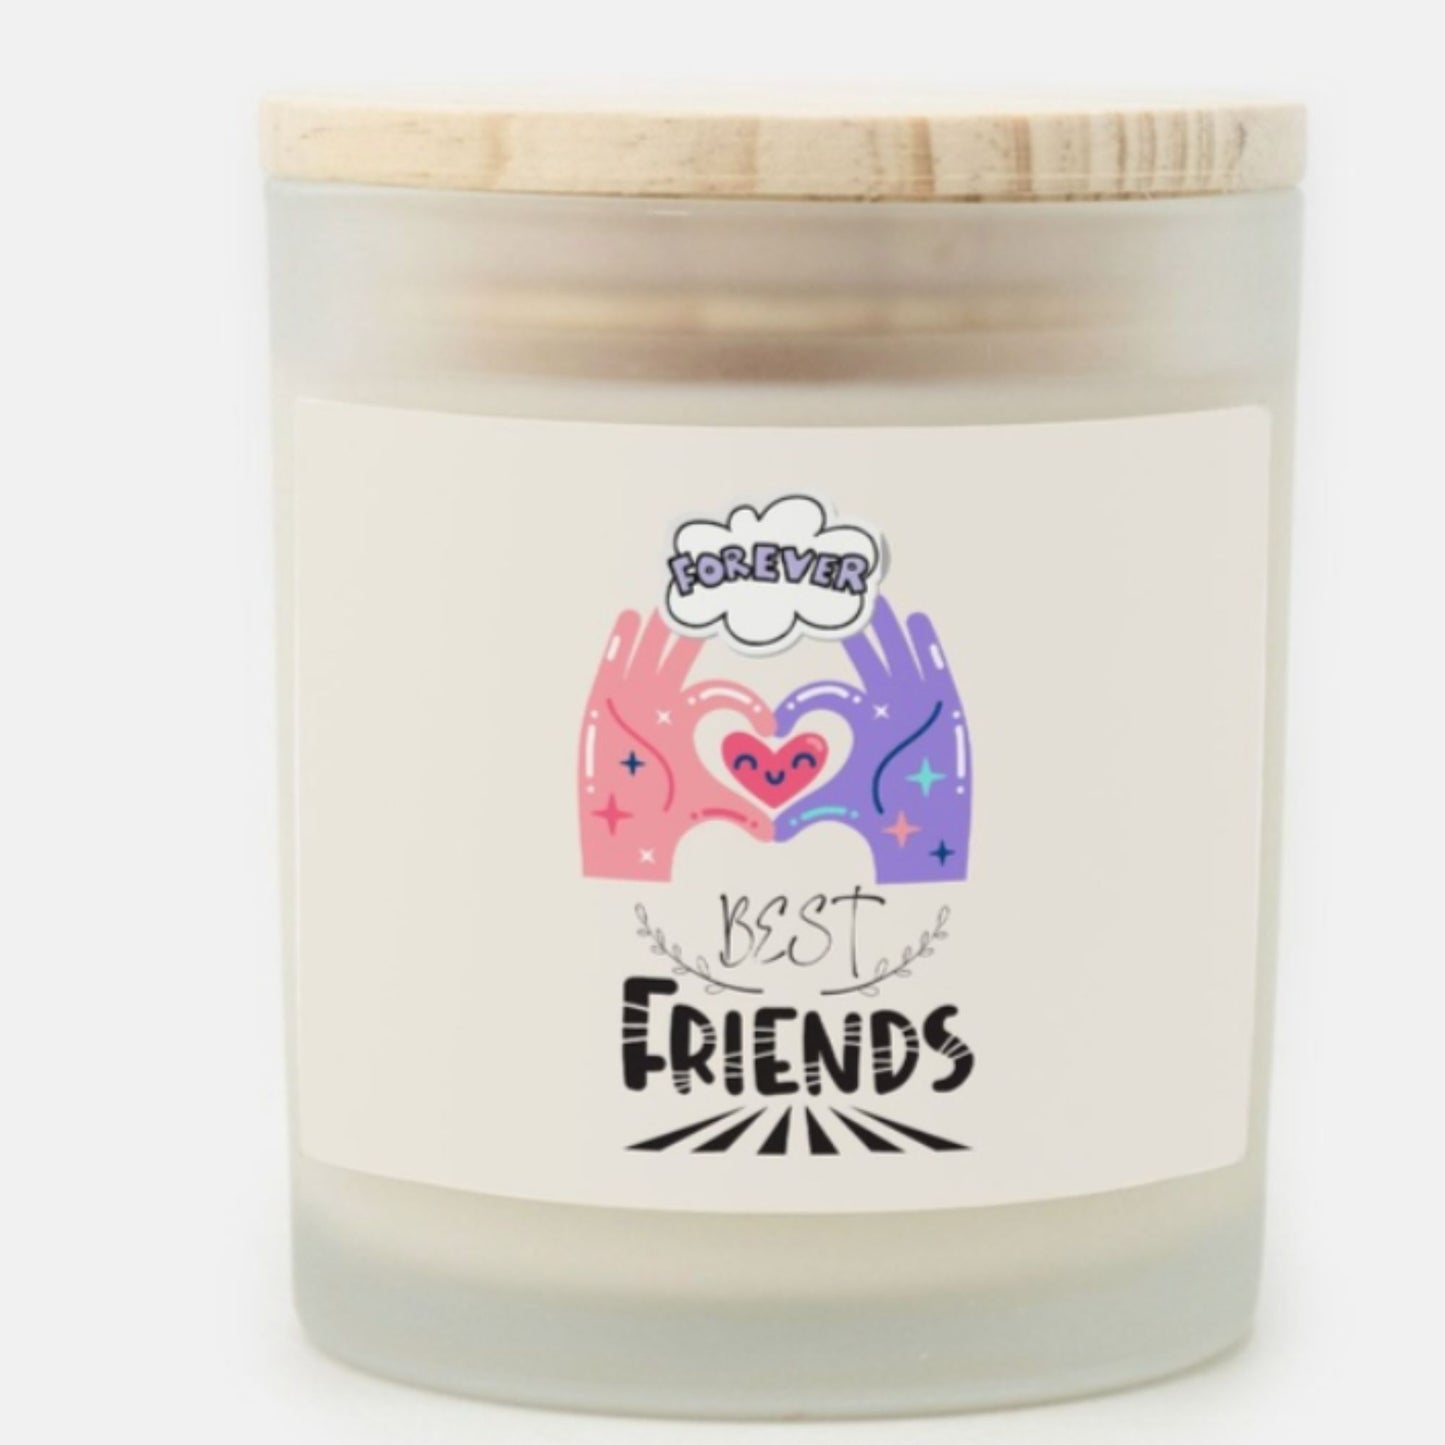 Forever Best Friend Candle Premium Non-Toxic Wood Wick Candle Frosted Glass (Hand Poured 11 oz)